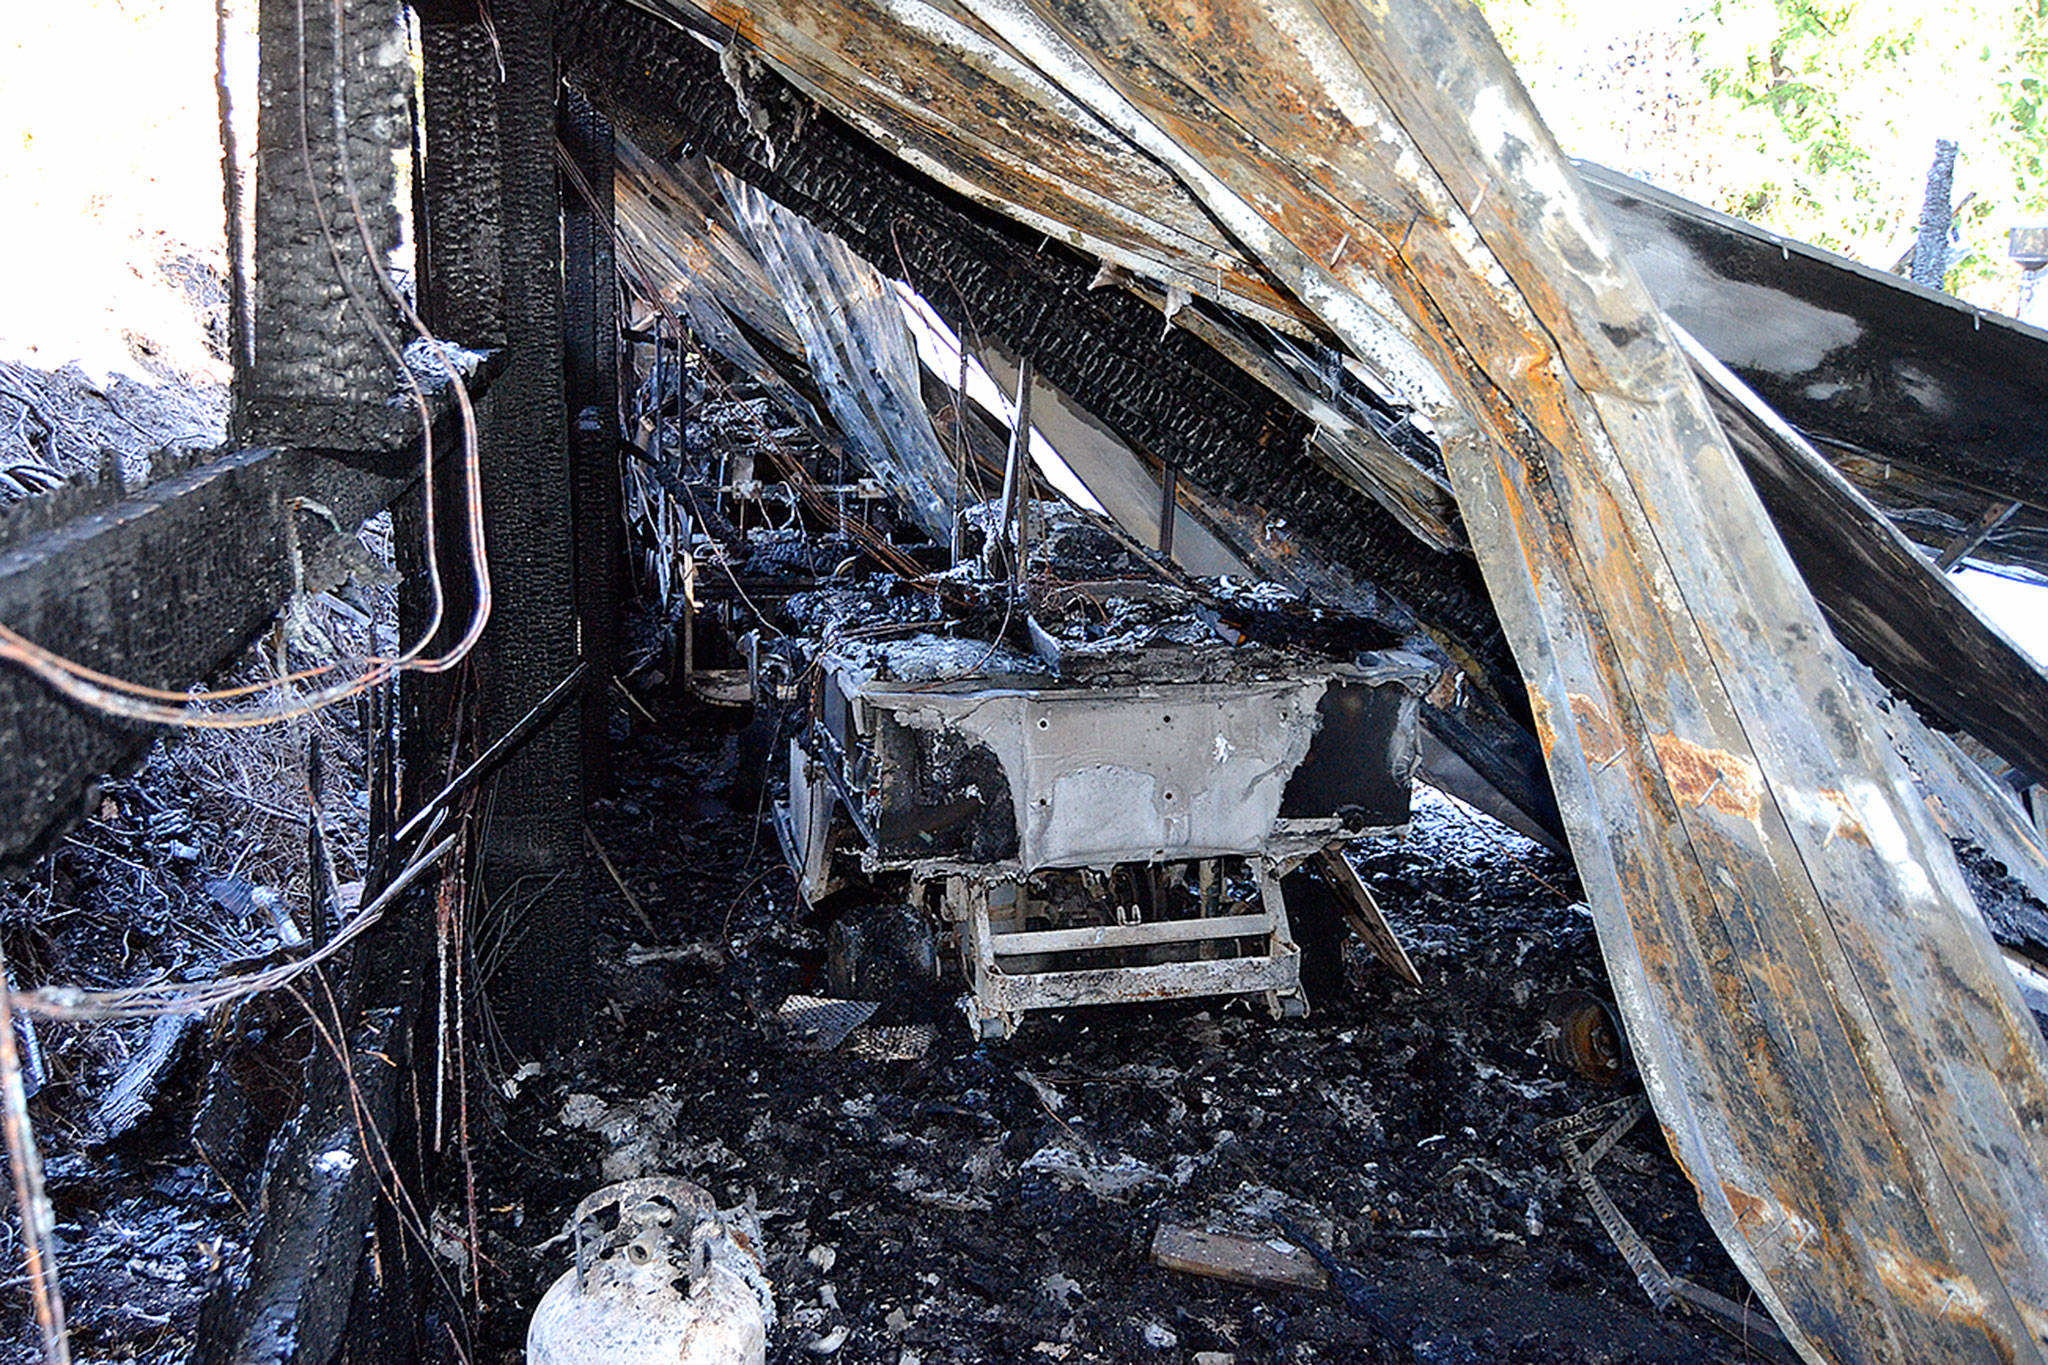 Staff with the Cedars at Dungeness estimate about 50 golf carts and other equipment were lost on Sunday, Sept. 16 in an early morning fire. No injuries were reported and the cause remains under investigation. Sequim Gazette photo by Matthew Nash